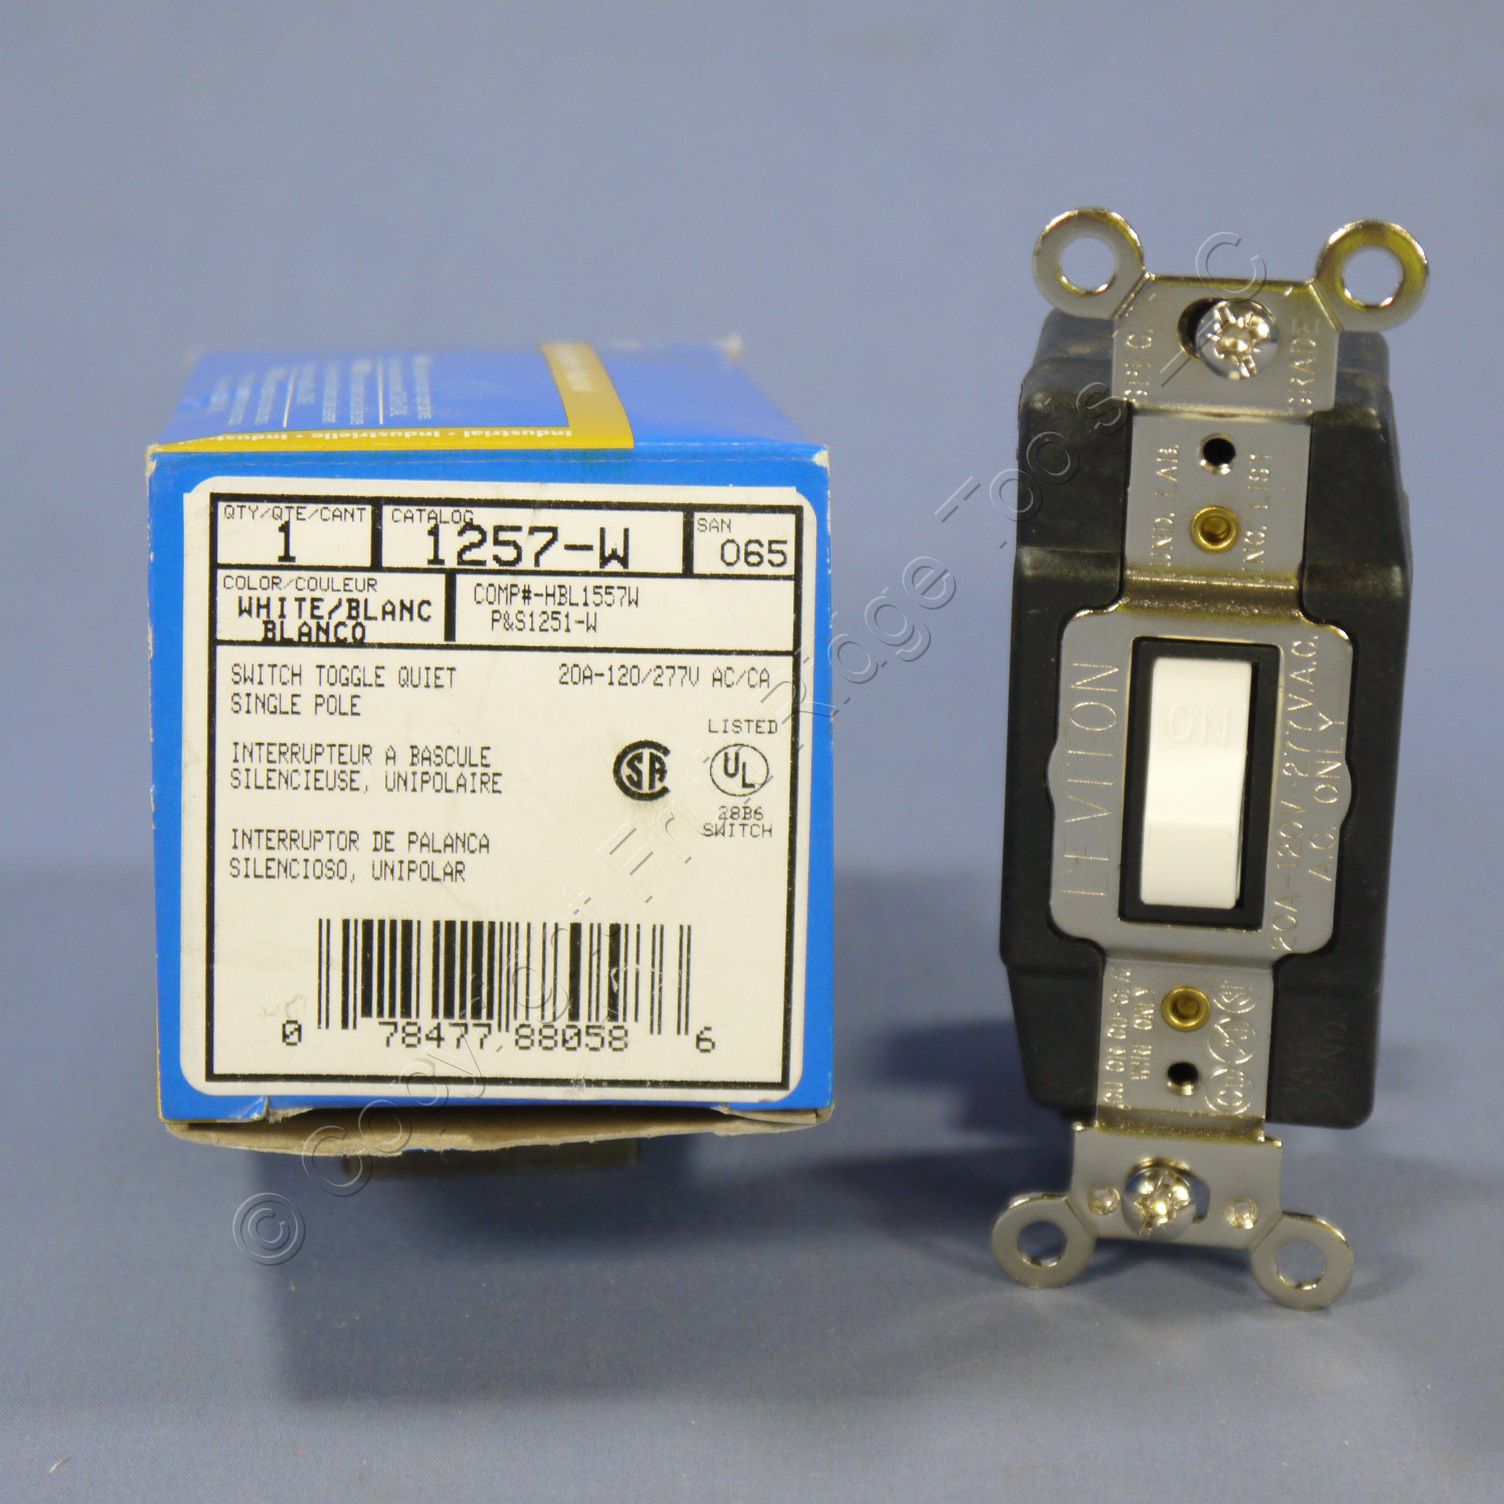 Leviton White Sdpt Momentary Contact Toggle Switch Center Off 20a 1257